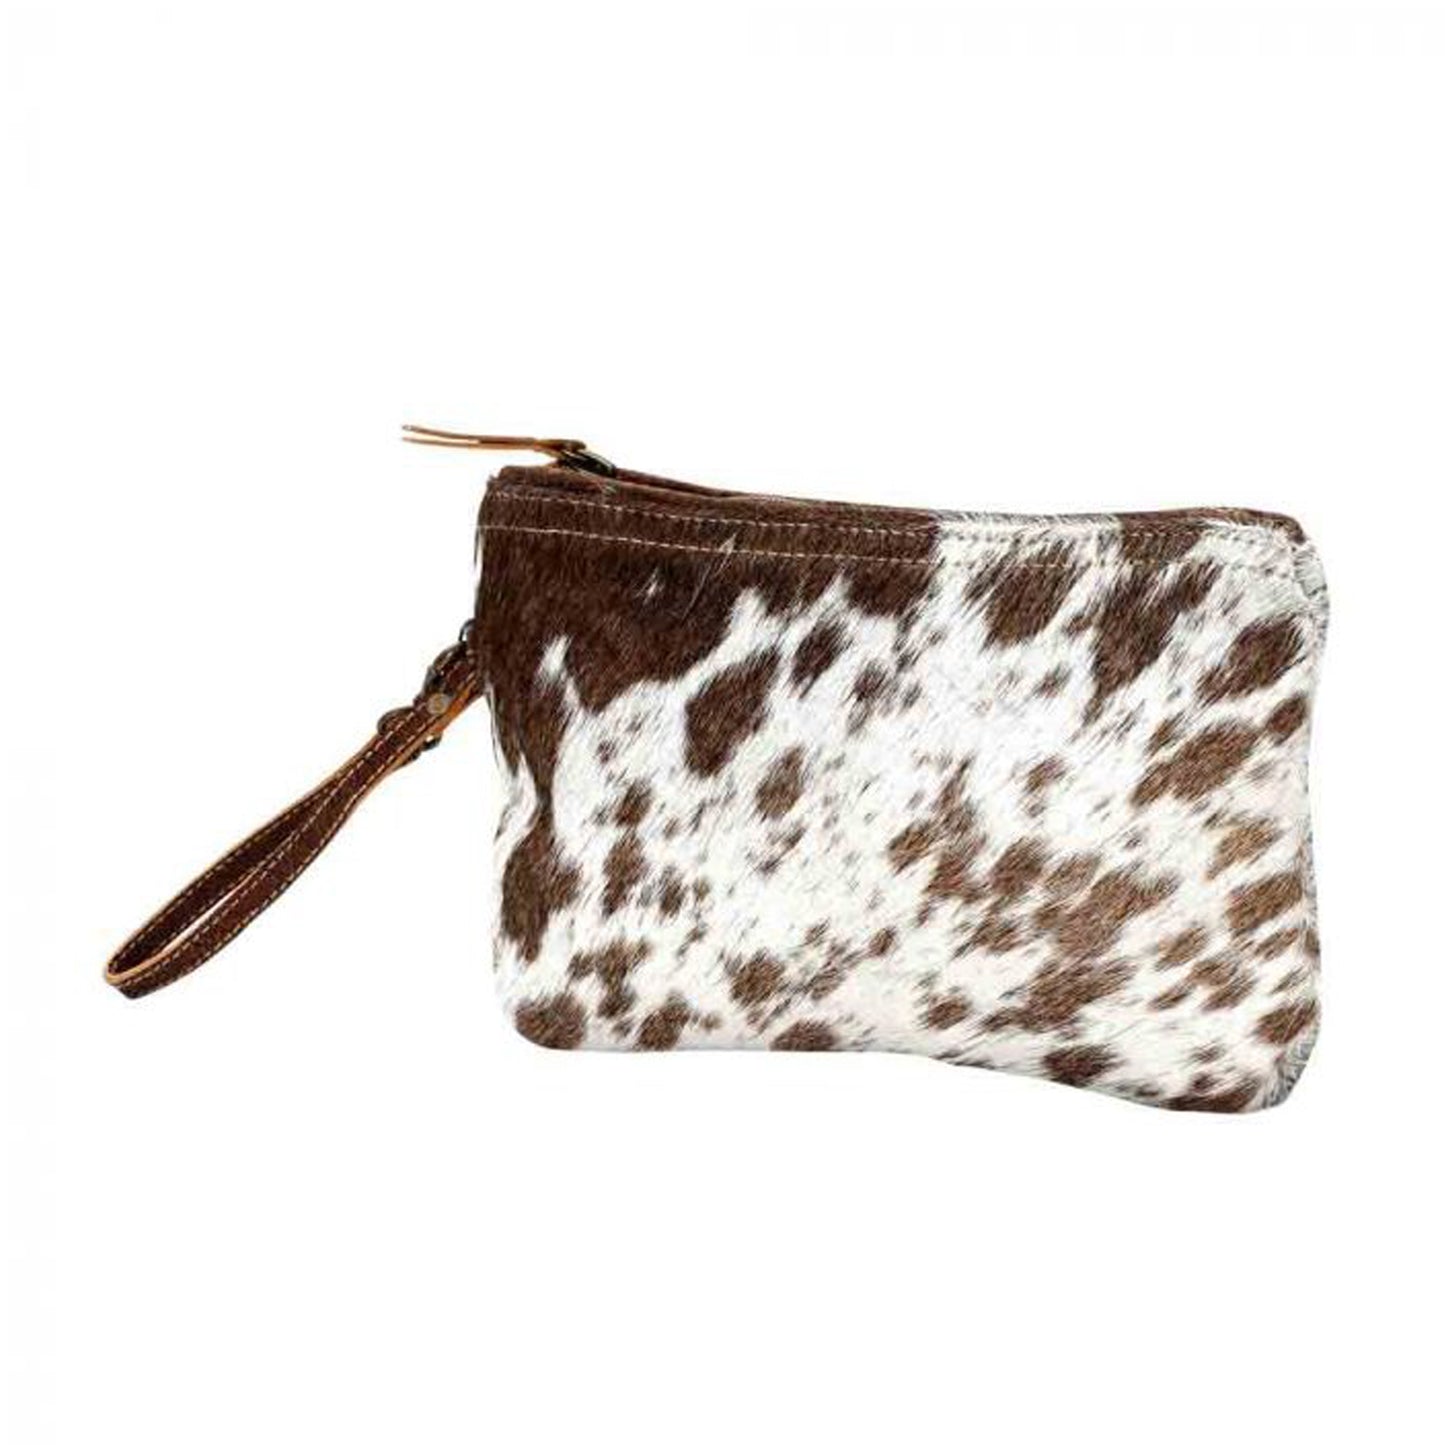 WHITE & BROWN HAIRON SMALL BAG BY MYRA BAGS